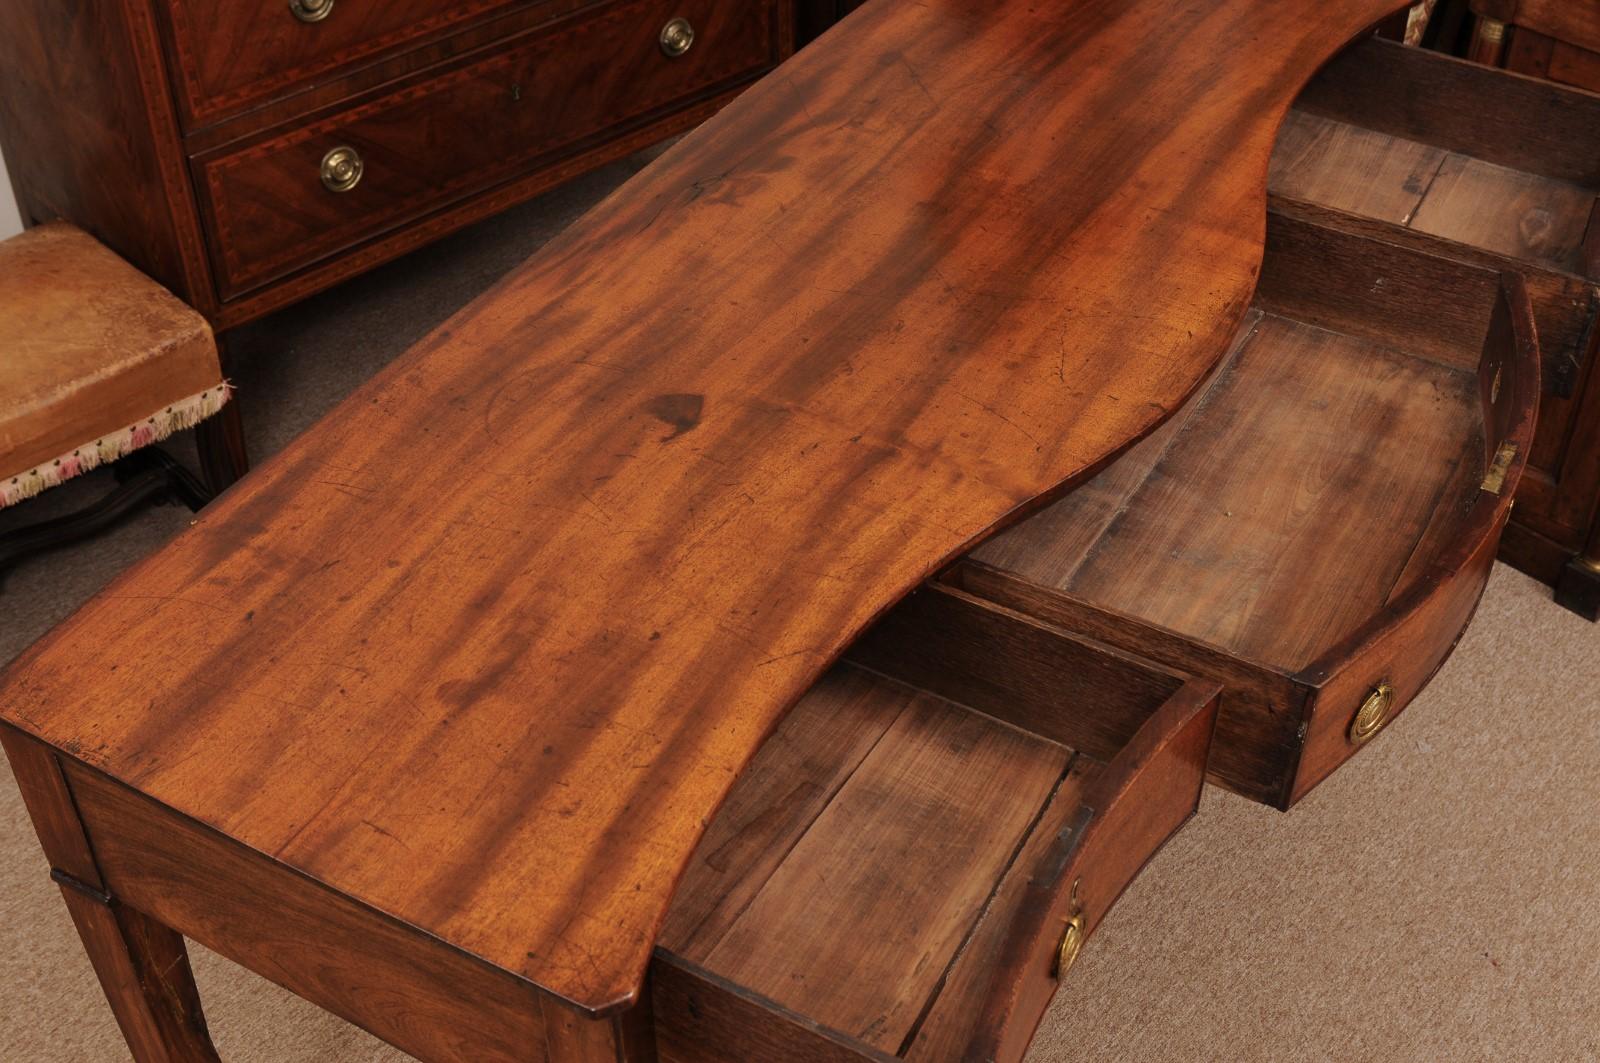 19th Century Mahogany Serving Serpentine Table with 3 Drawers For Sale 4